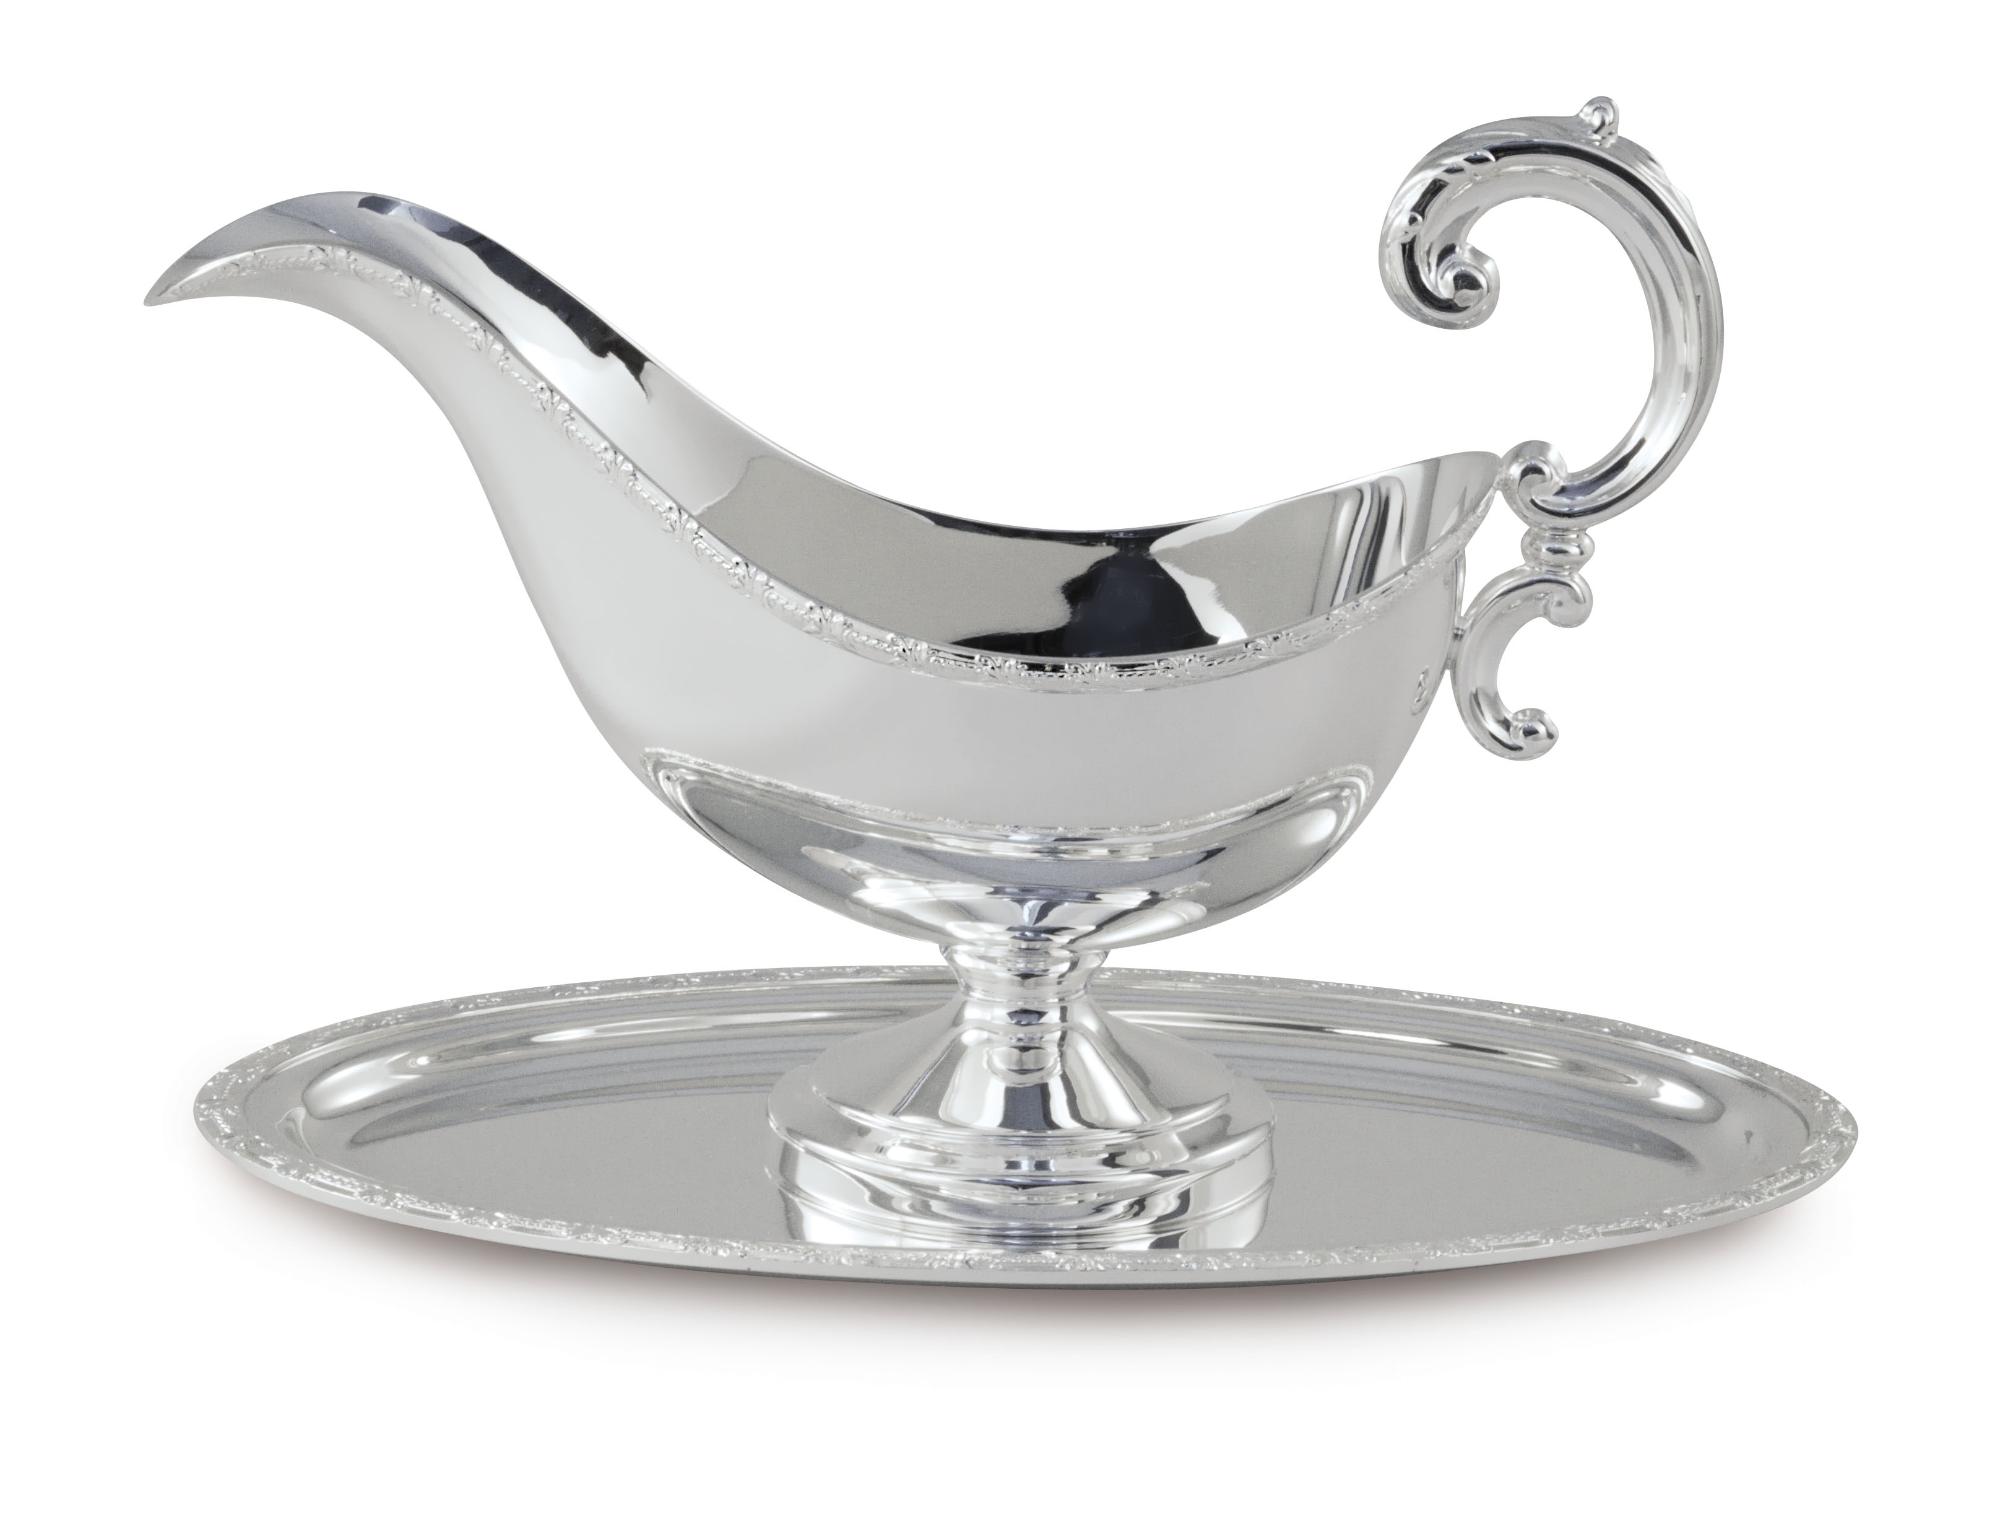 Royal Silver Sauce Boat with Saucer